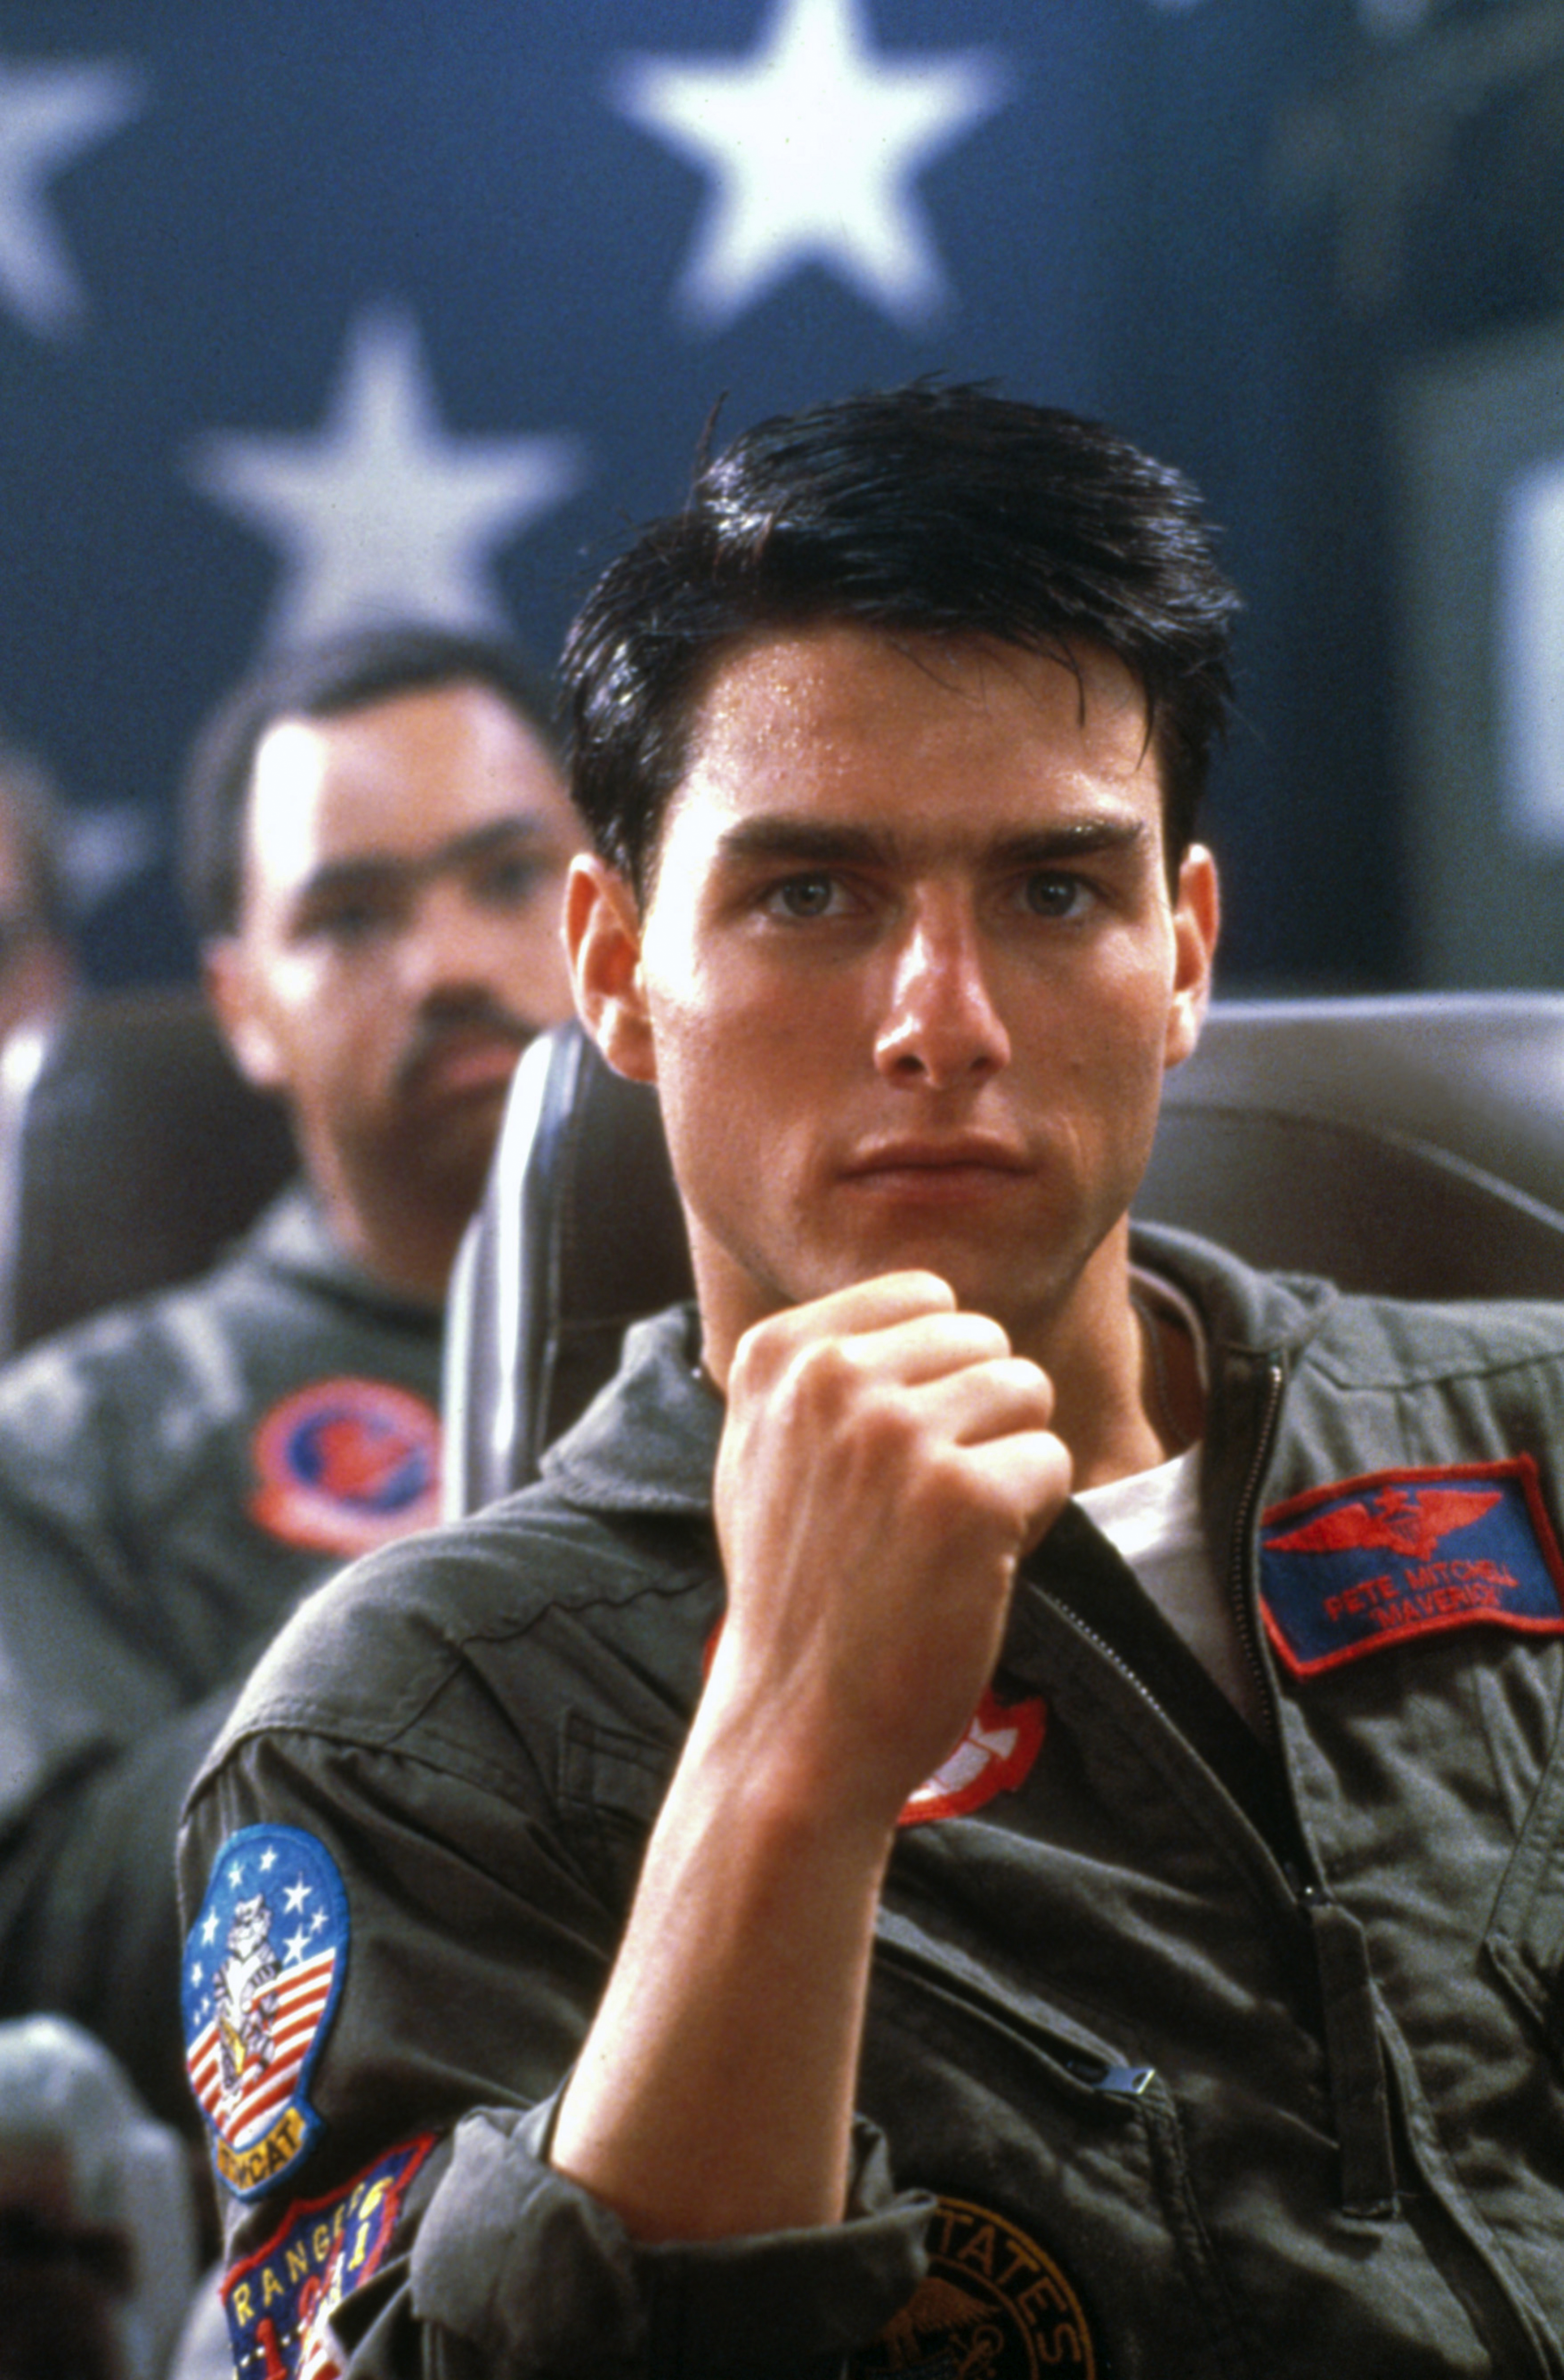 Tom Cruise on the set of "Top Gun" in 1986 | Source: Getty Images